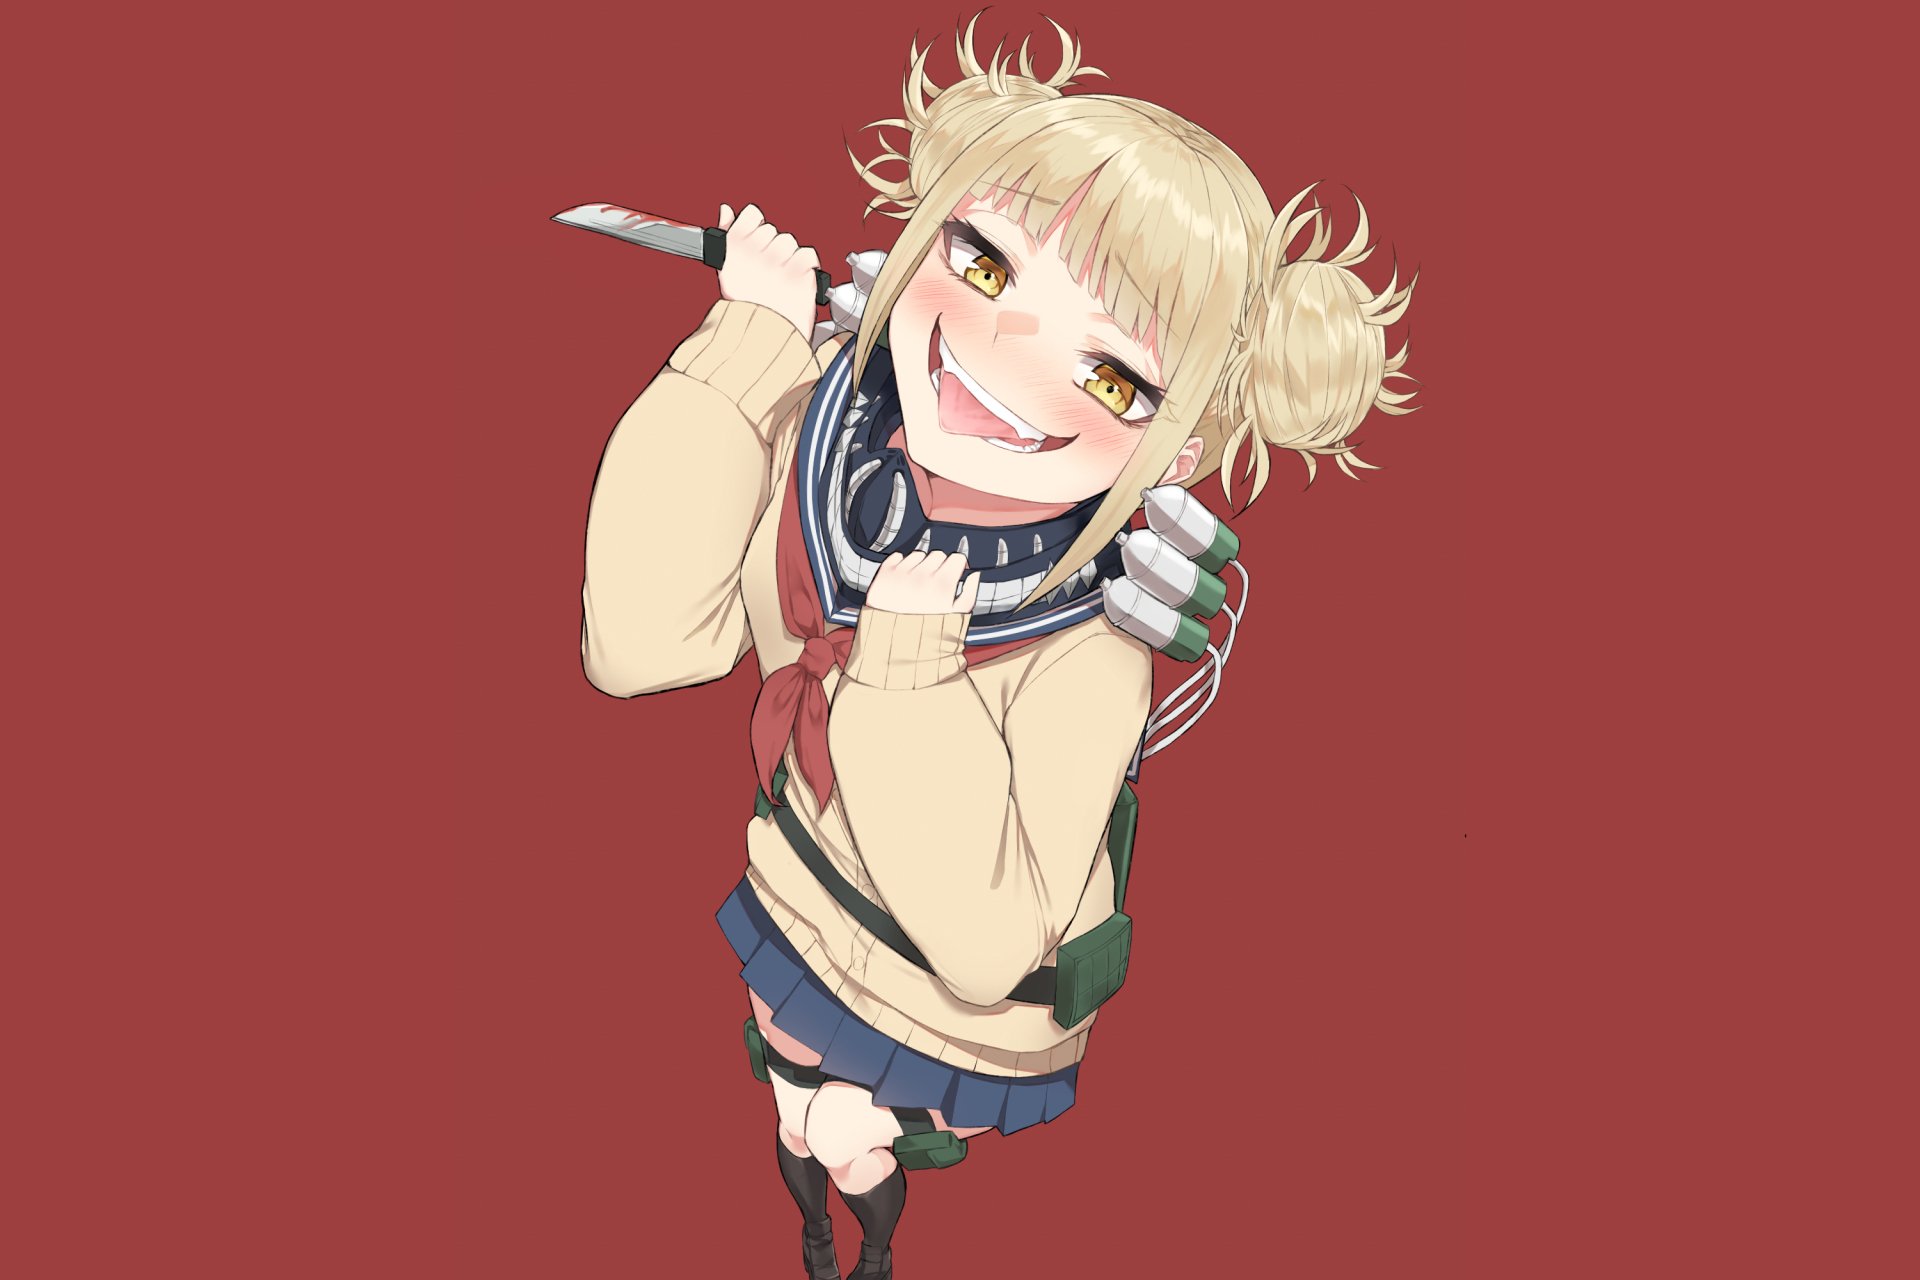 Download Himiko Toga Anime My Hero Academia Hd Wallpaper By Applepie 4358